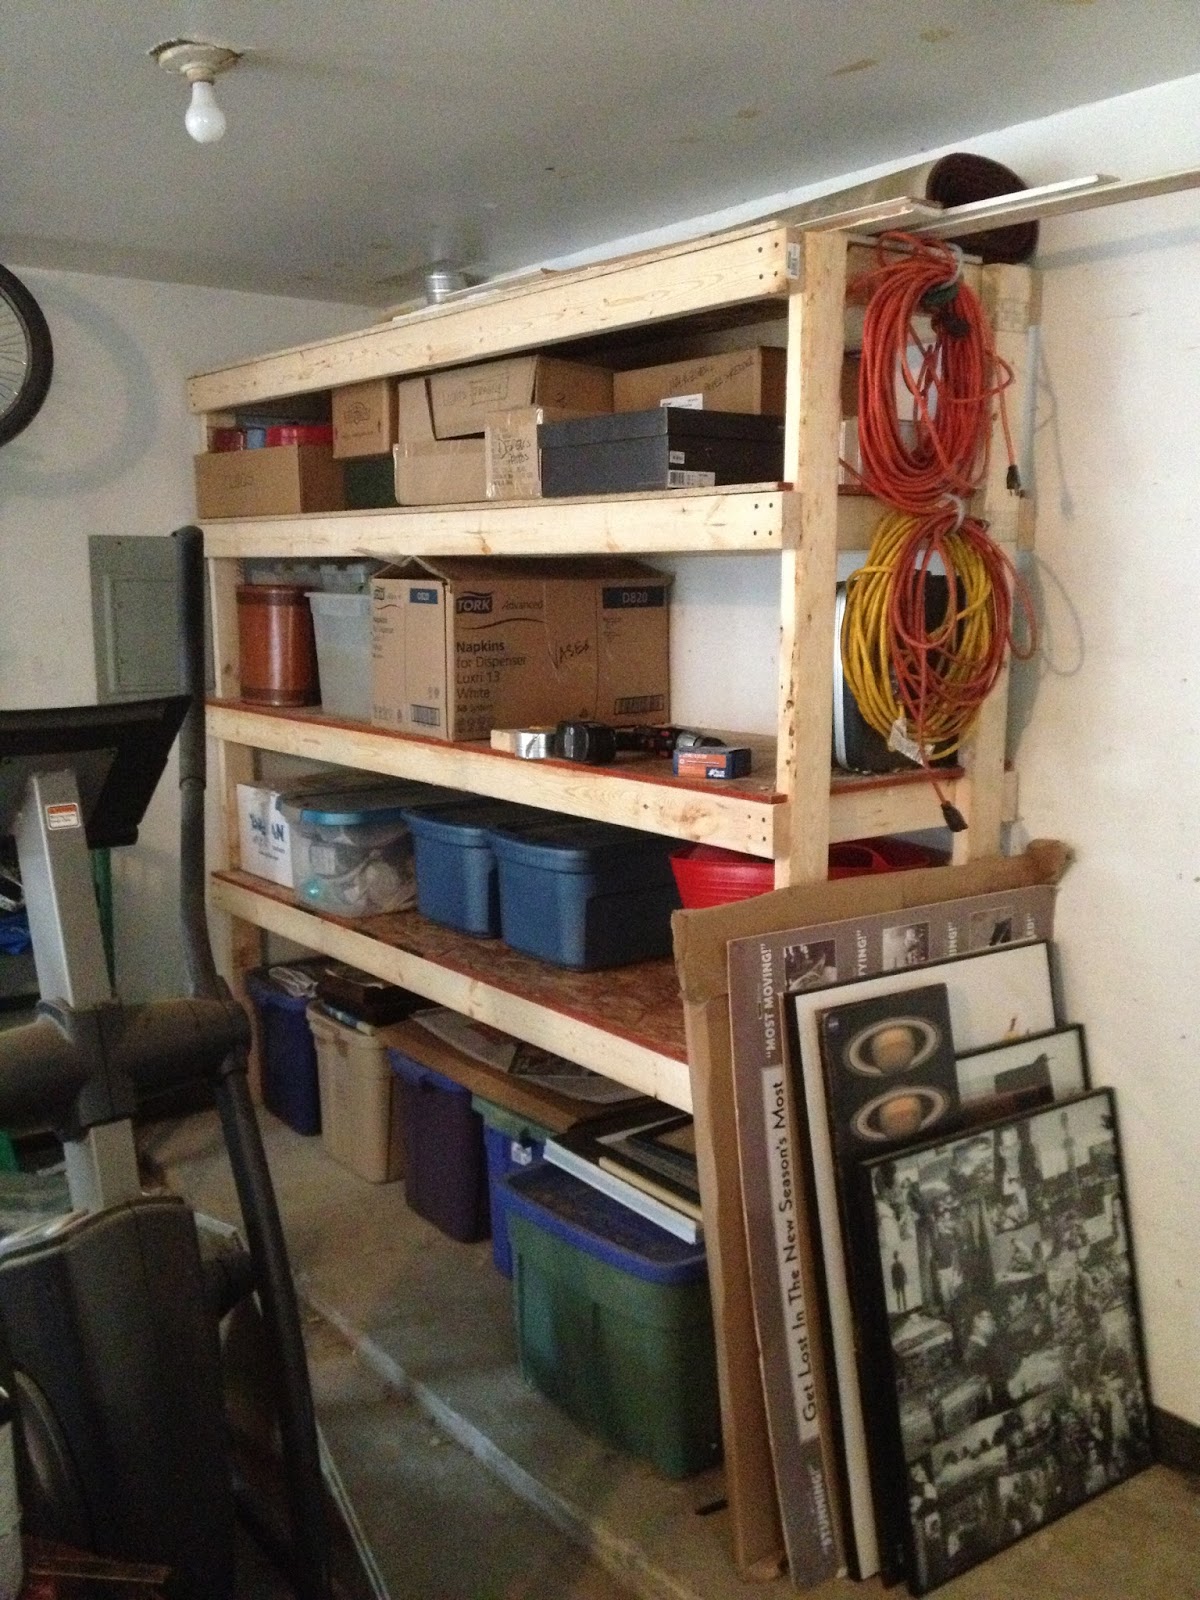 Diy Garage Shelves 2x4 Along with this build,